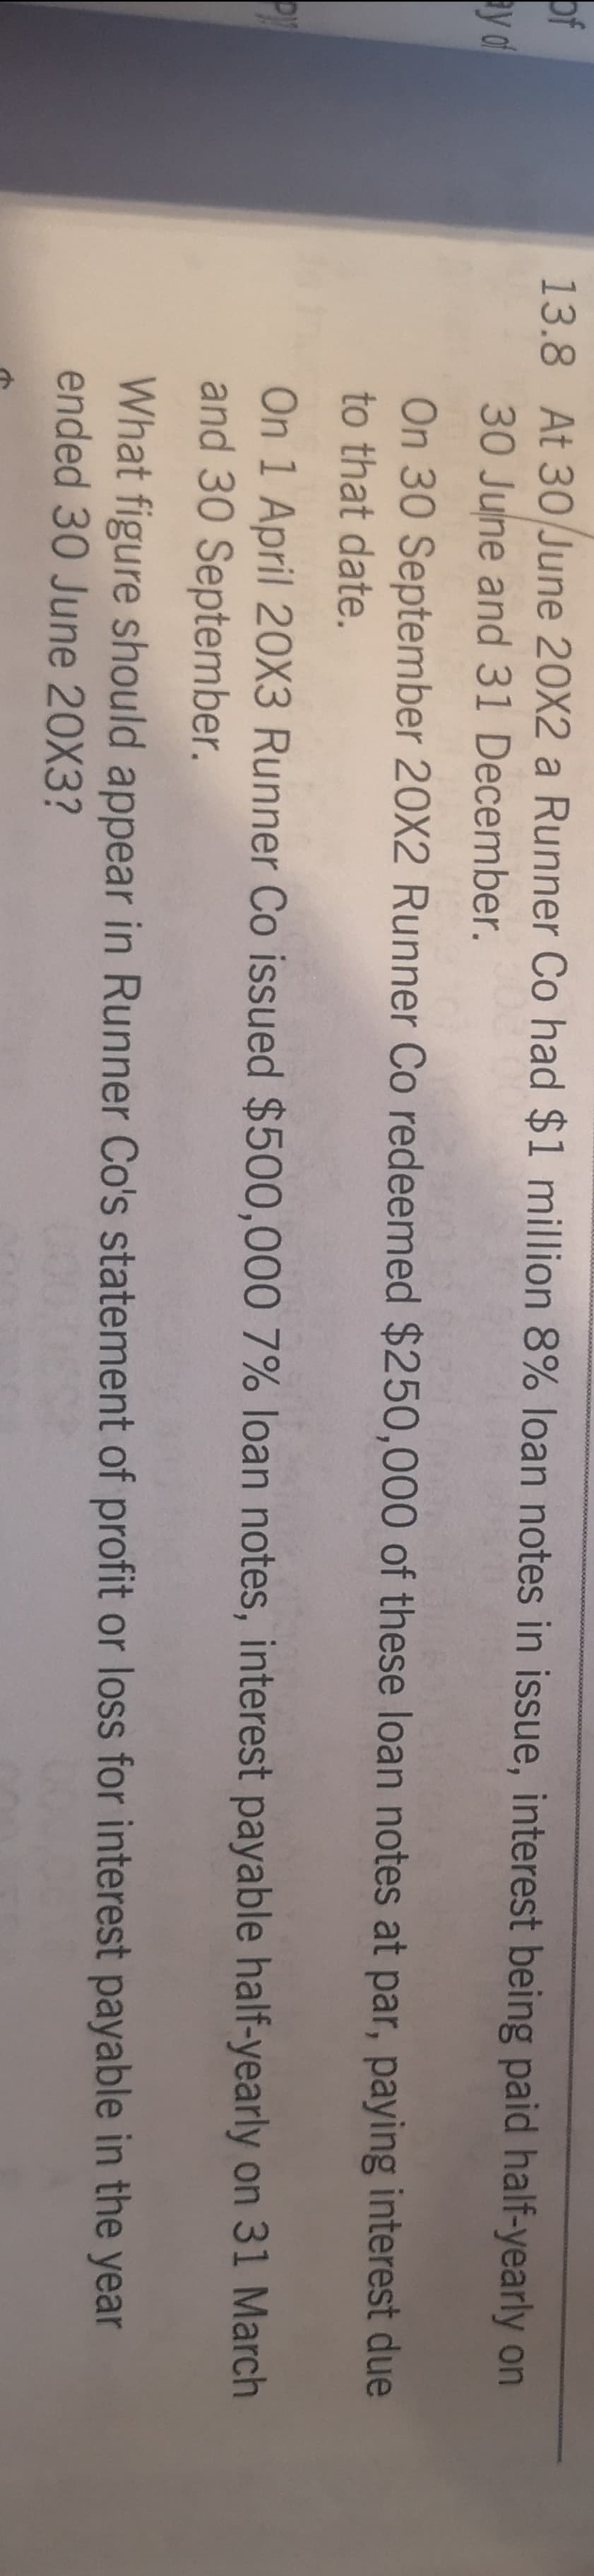 of
y df
13.8 At 30 June 20X2 a Runner Co had $1 million 8% loan notes in issue, interest being paid half-yearly on
30 June and 31 December.
On 30 September 20X2 Runner Co redeemed $250,000 of these loan notes at par, paying interest due
to that date.
On 1 April 20X3 Runner Co issued $500,000 7% loan notes, interest payable half-yearly on 31 March
and 30 September.
What figure should appear in Runner Co's statement of profit or loss for interest payable in the year
ended 30 June 20X3?
